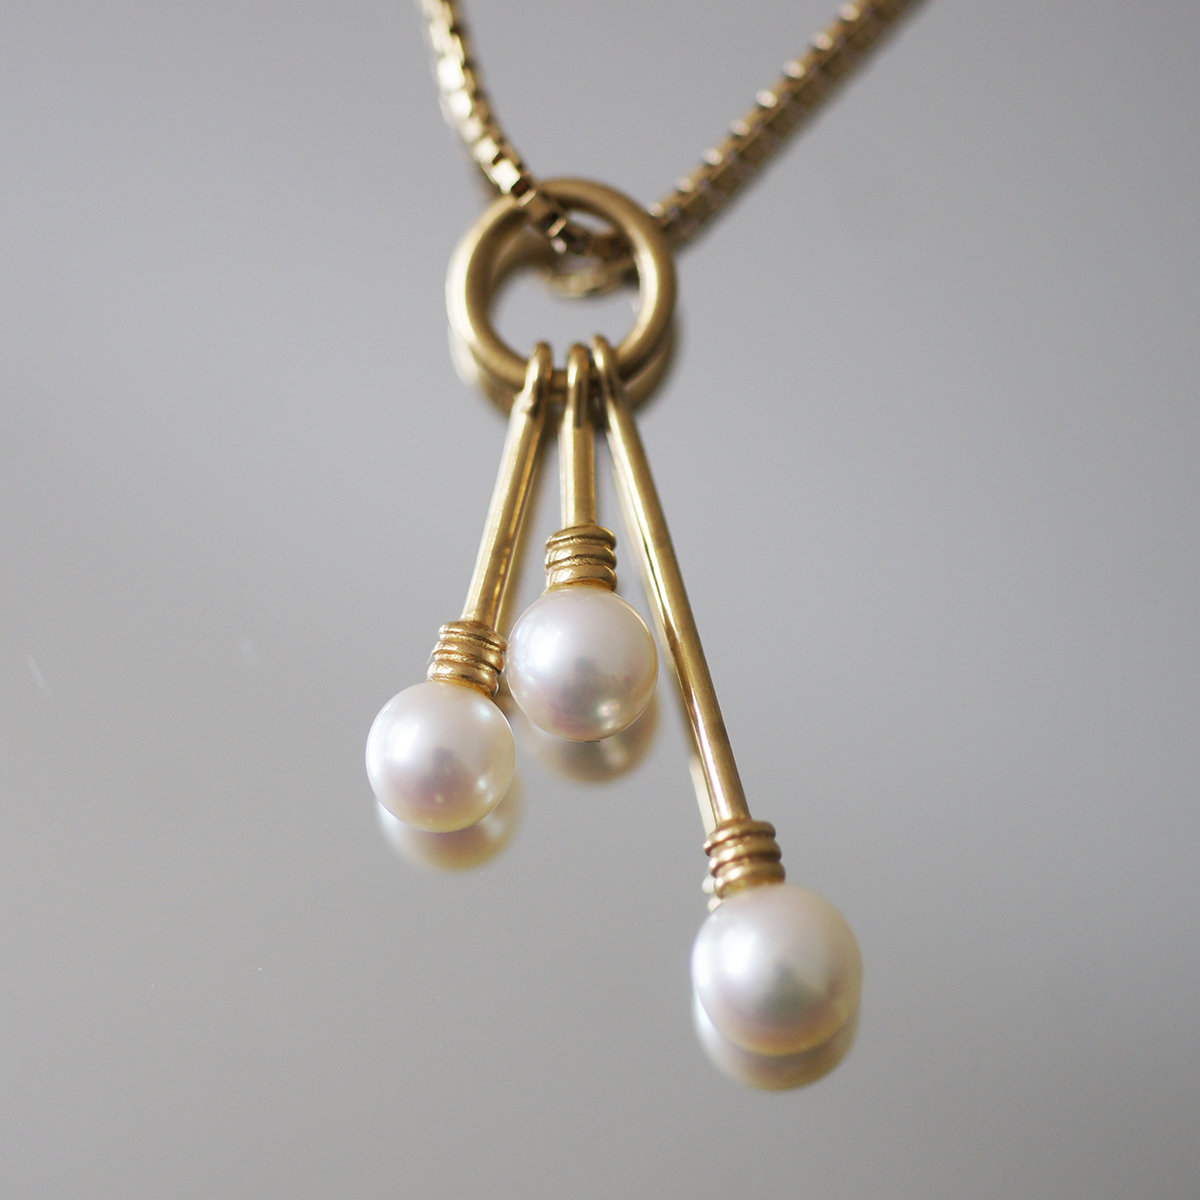 K18 YG 3P pearl Vintage pendant top 3.0g necklace charm book@ pearl yellow gold jewelry lady's 18 gold 750